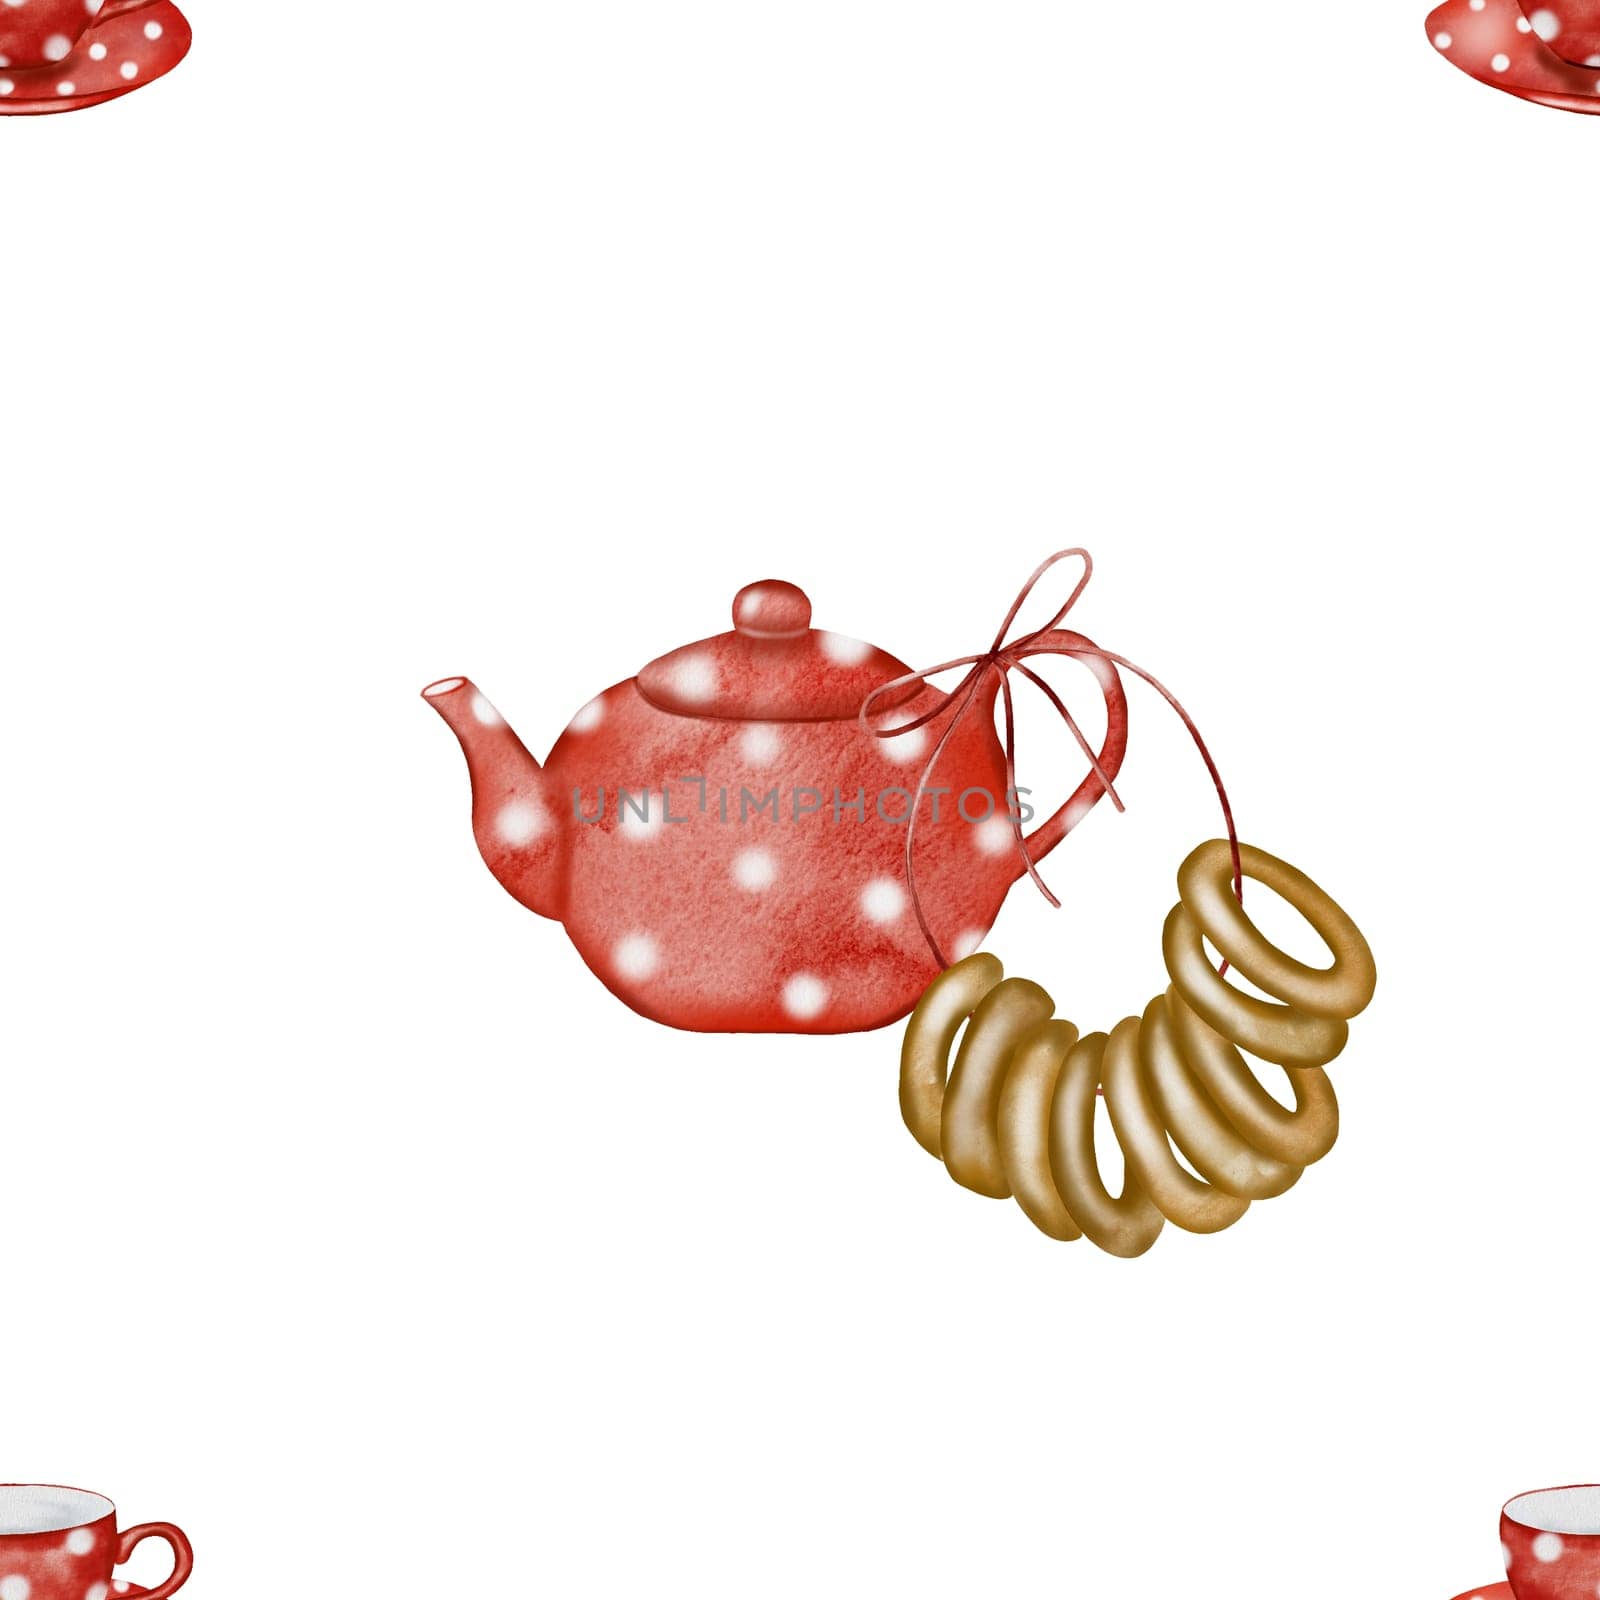 Pattern with a teapot and cups. Seamless pattern with bagels teapot and red cups with white polka dots. For home kitchen textiles and packaging for fresh baked goods stores by TatyanaTrushcheleva